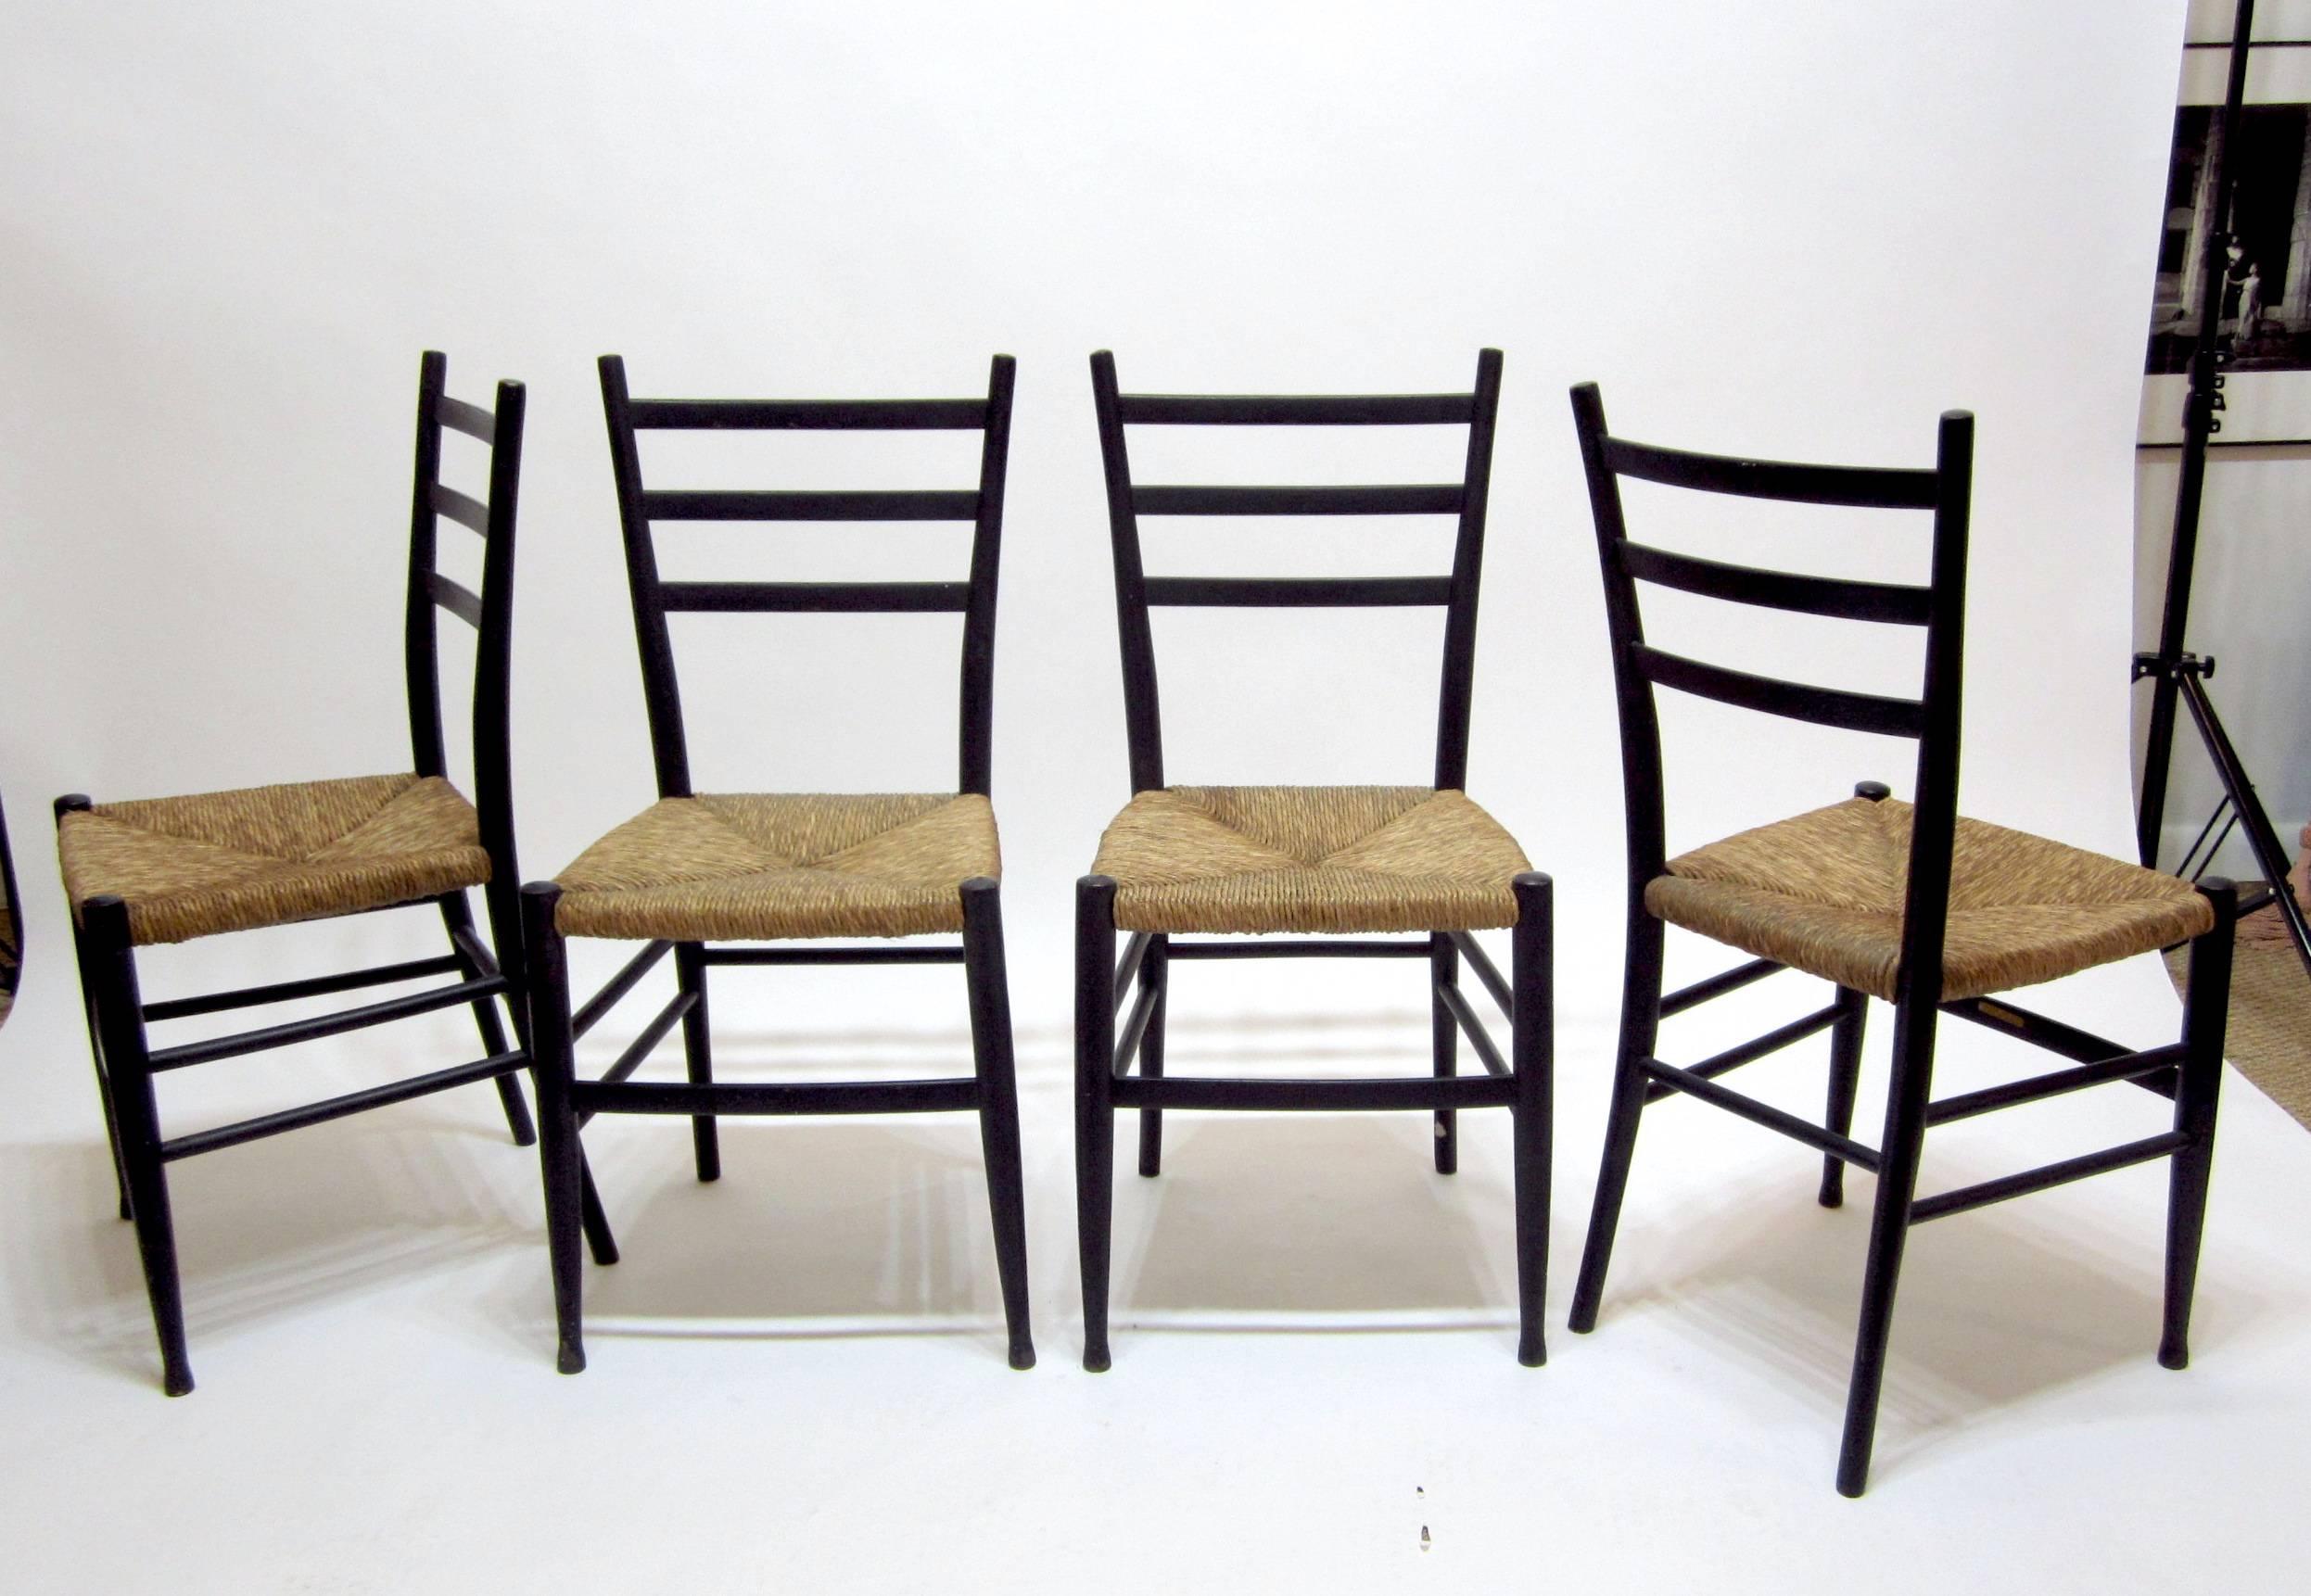 Set of four black painted wood ladder back chairs with rush seats. The seats are in excellent condition and the painted wood frames show normal wear, no breaks or damage.